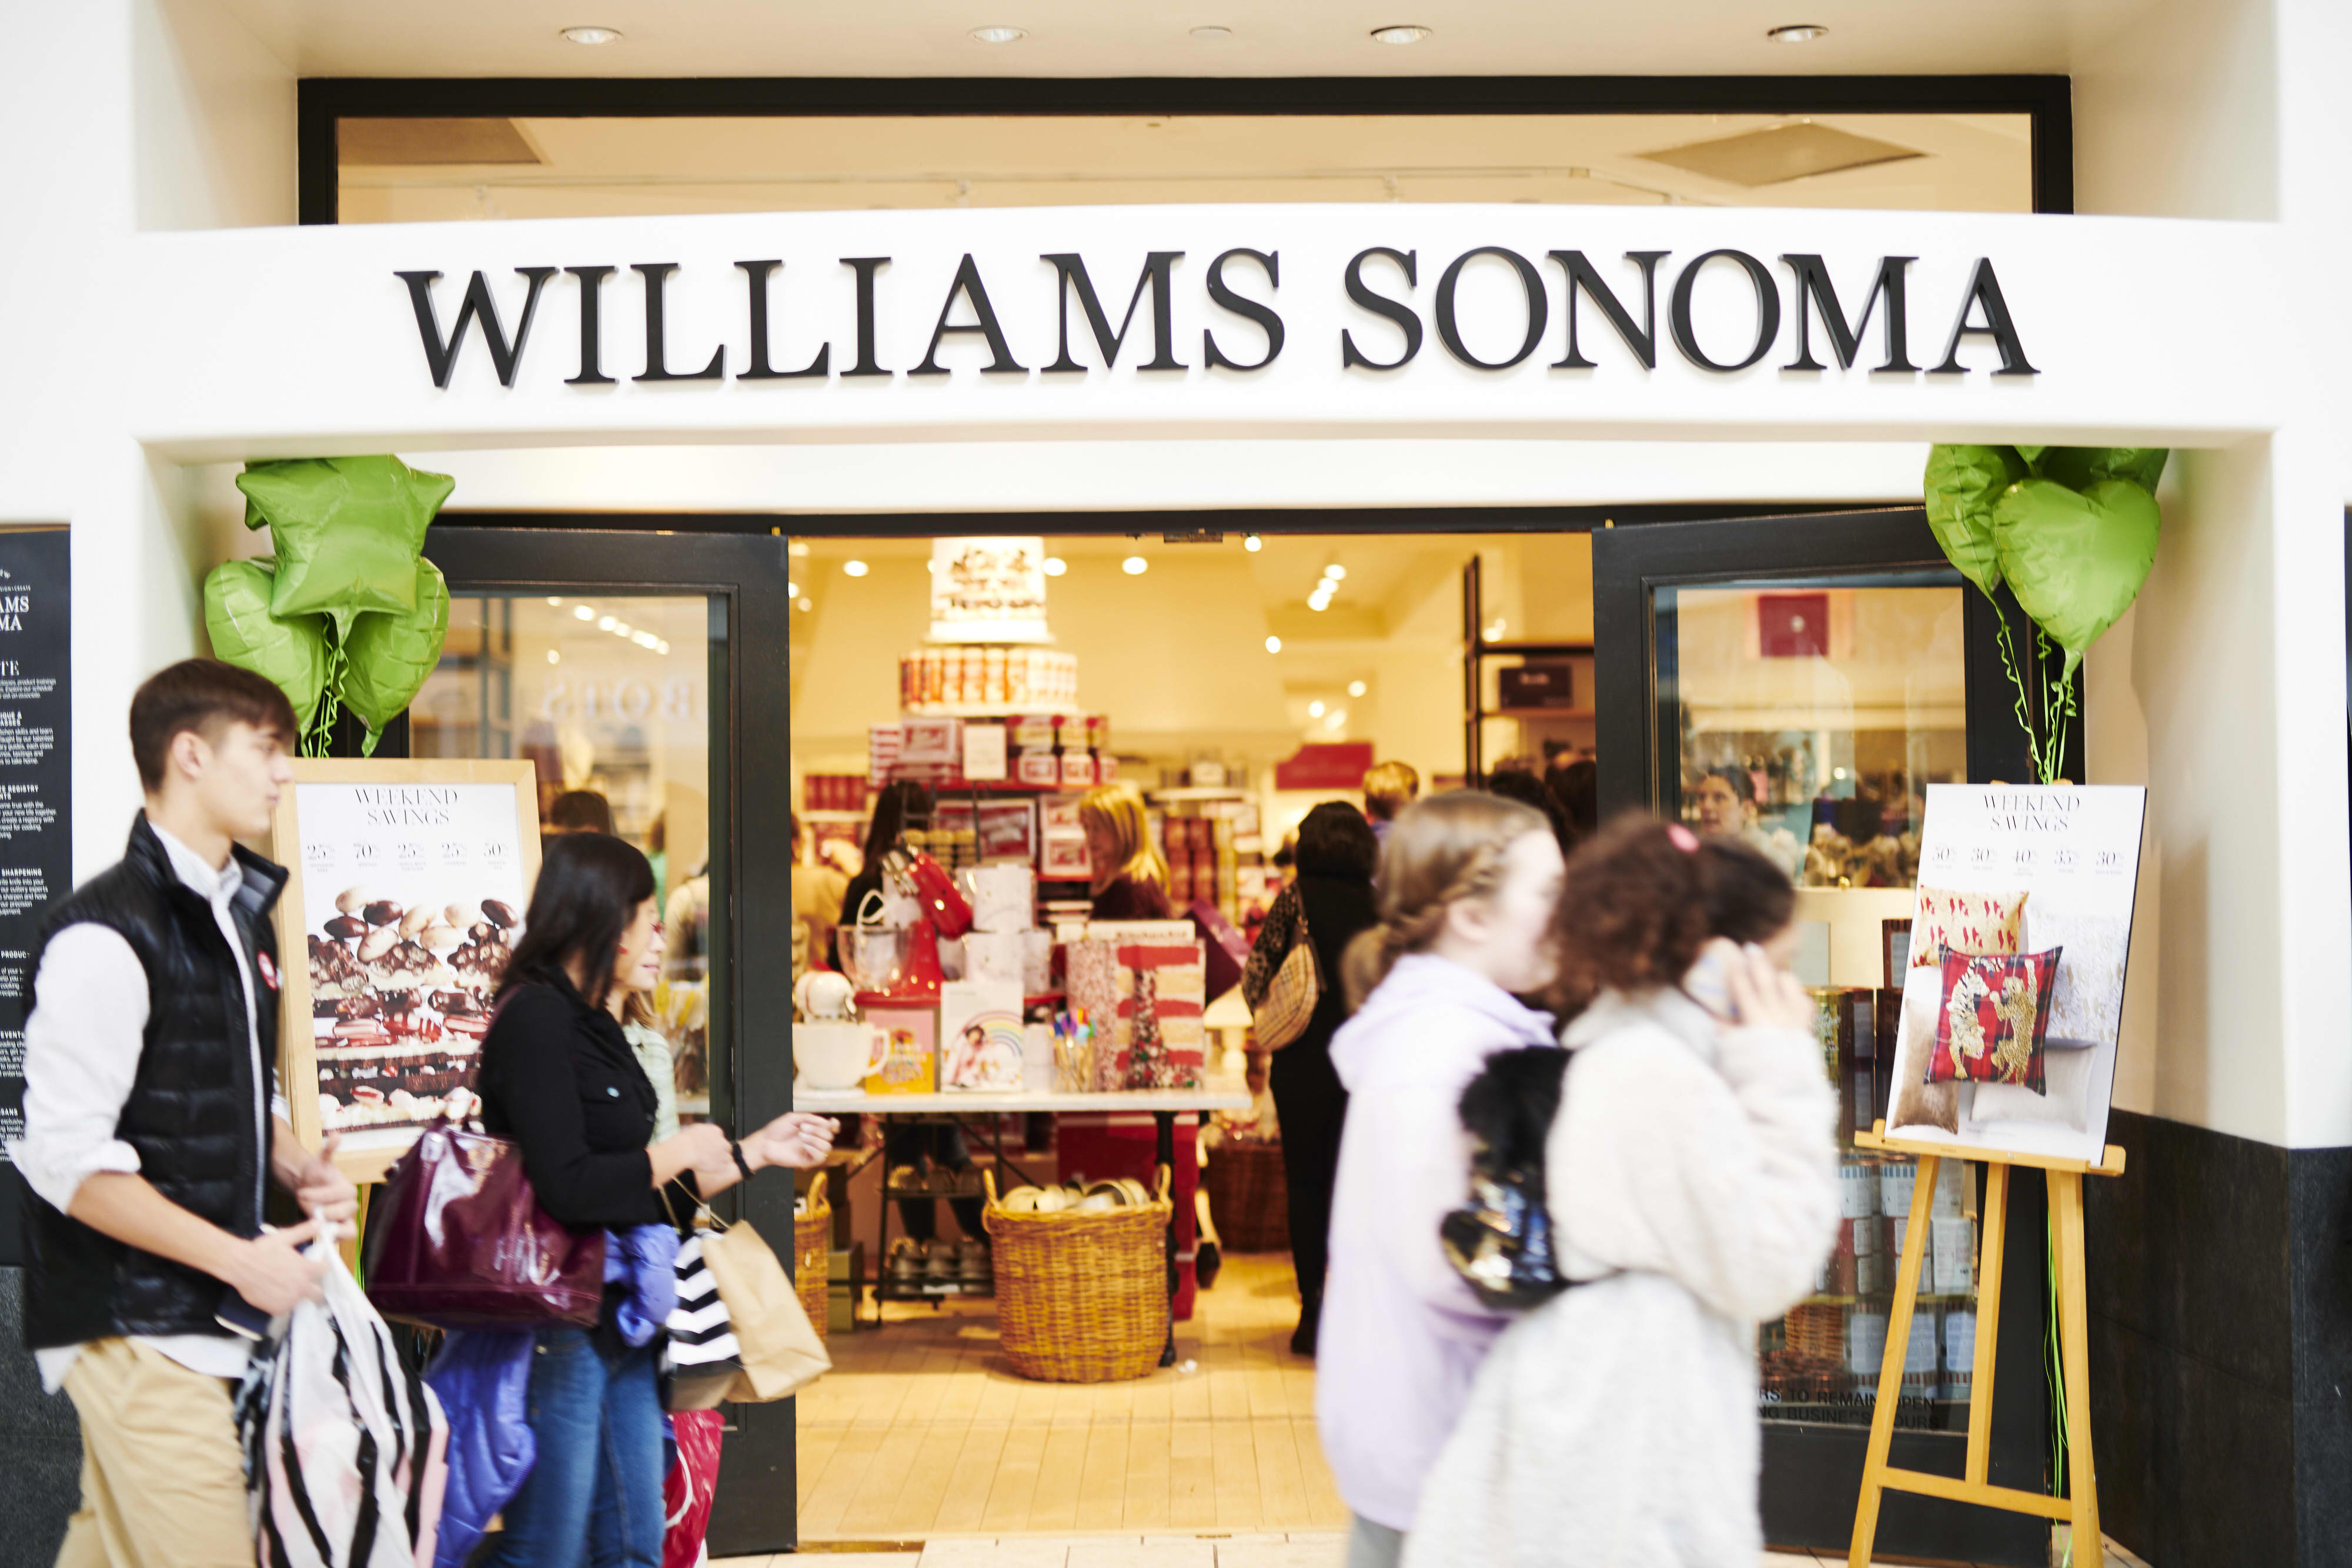 Williams-Sonoma will ride on the holiday entertainment trend